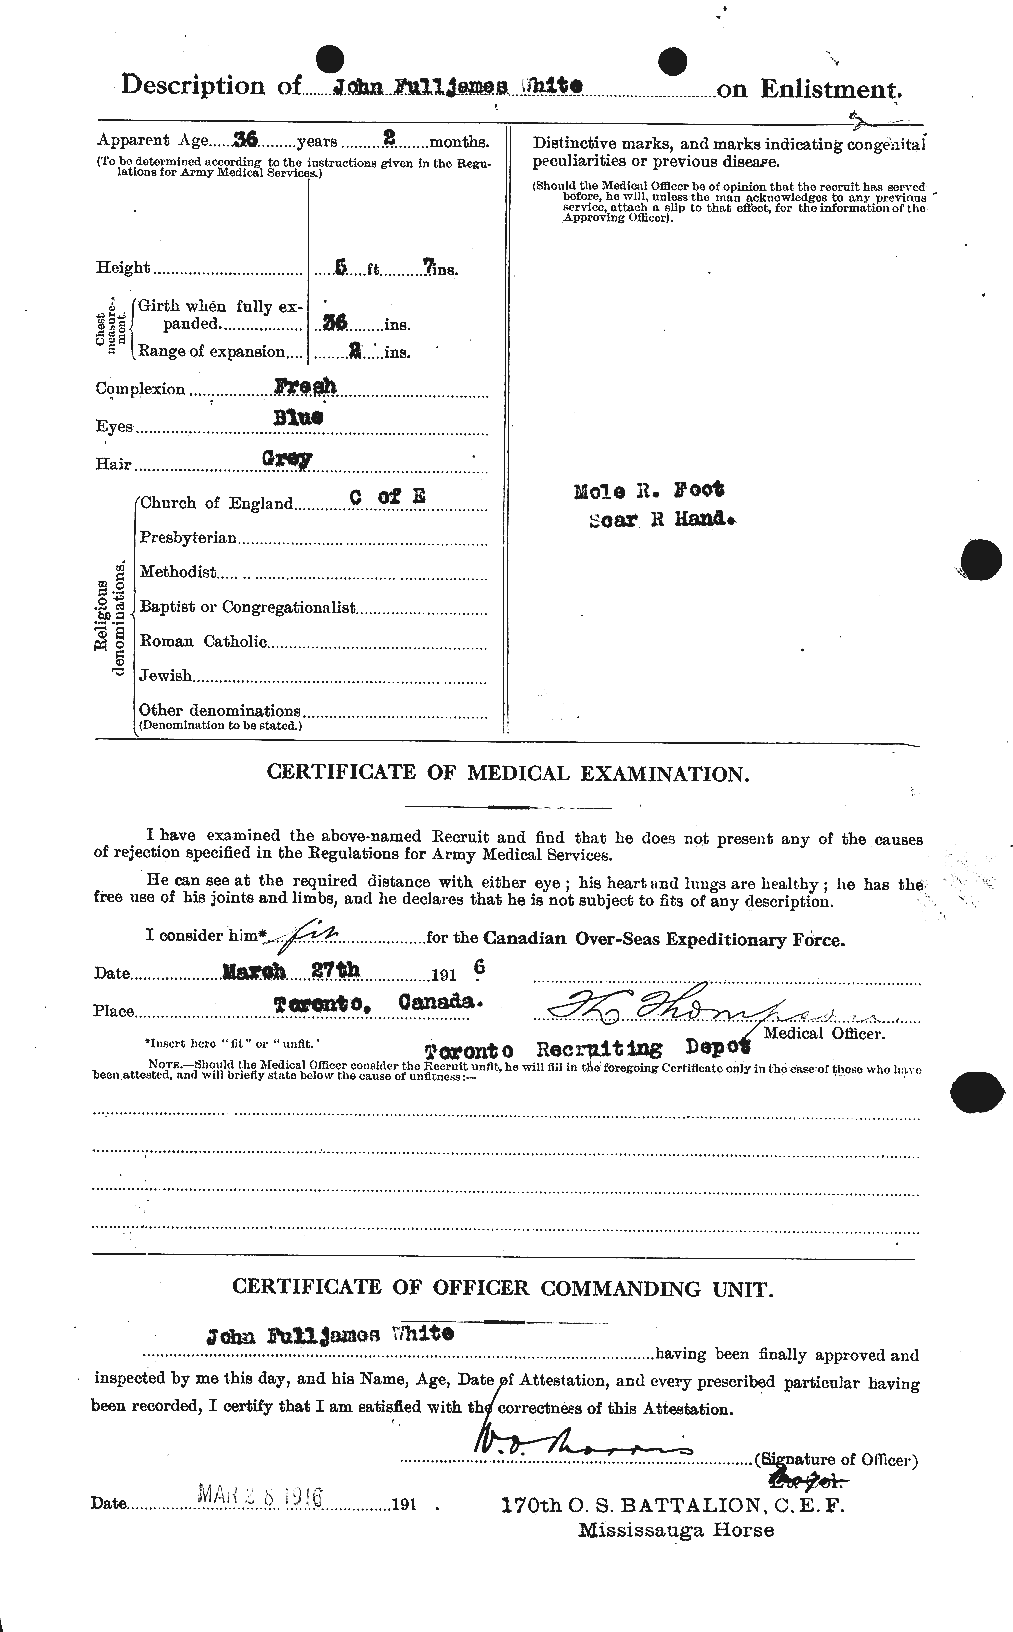 Personnel Records of the First World War - CEF 671562b